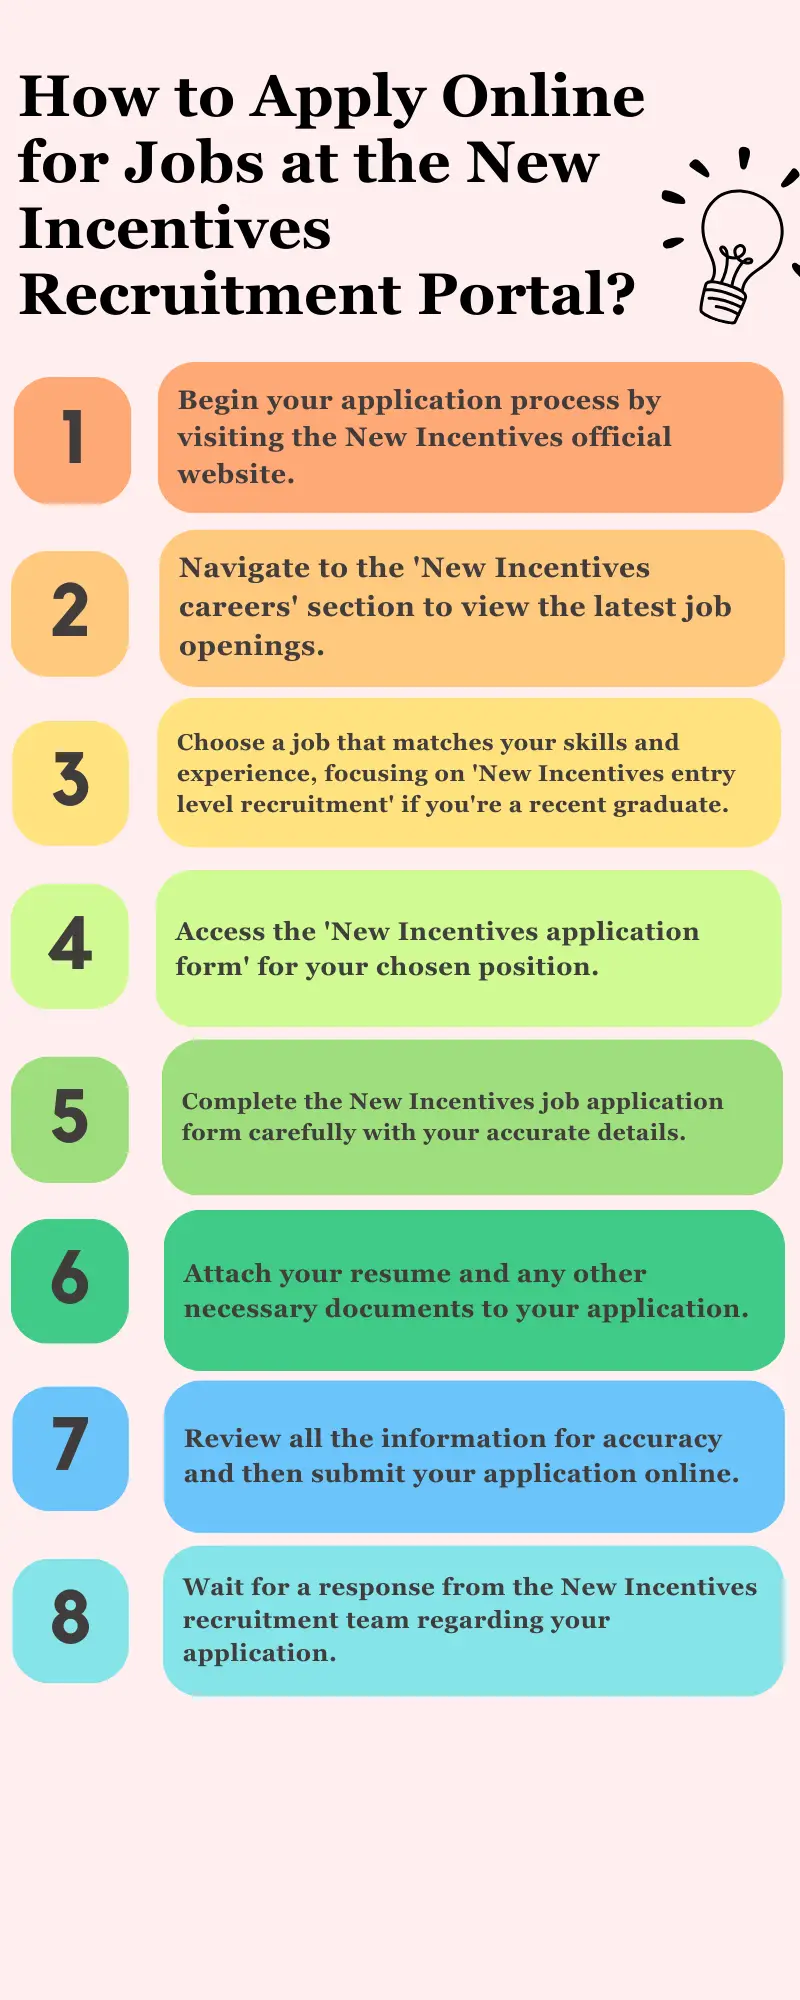 How to Apply Online for Jobs at the New Incentives Recruitment Portal?